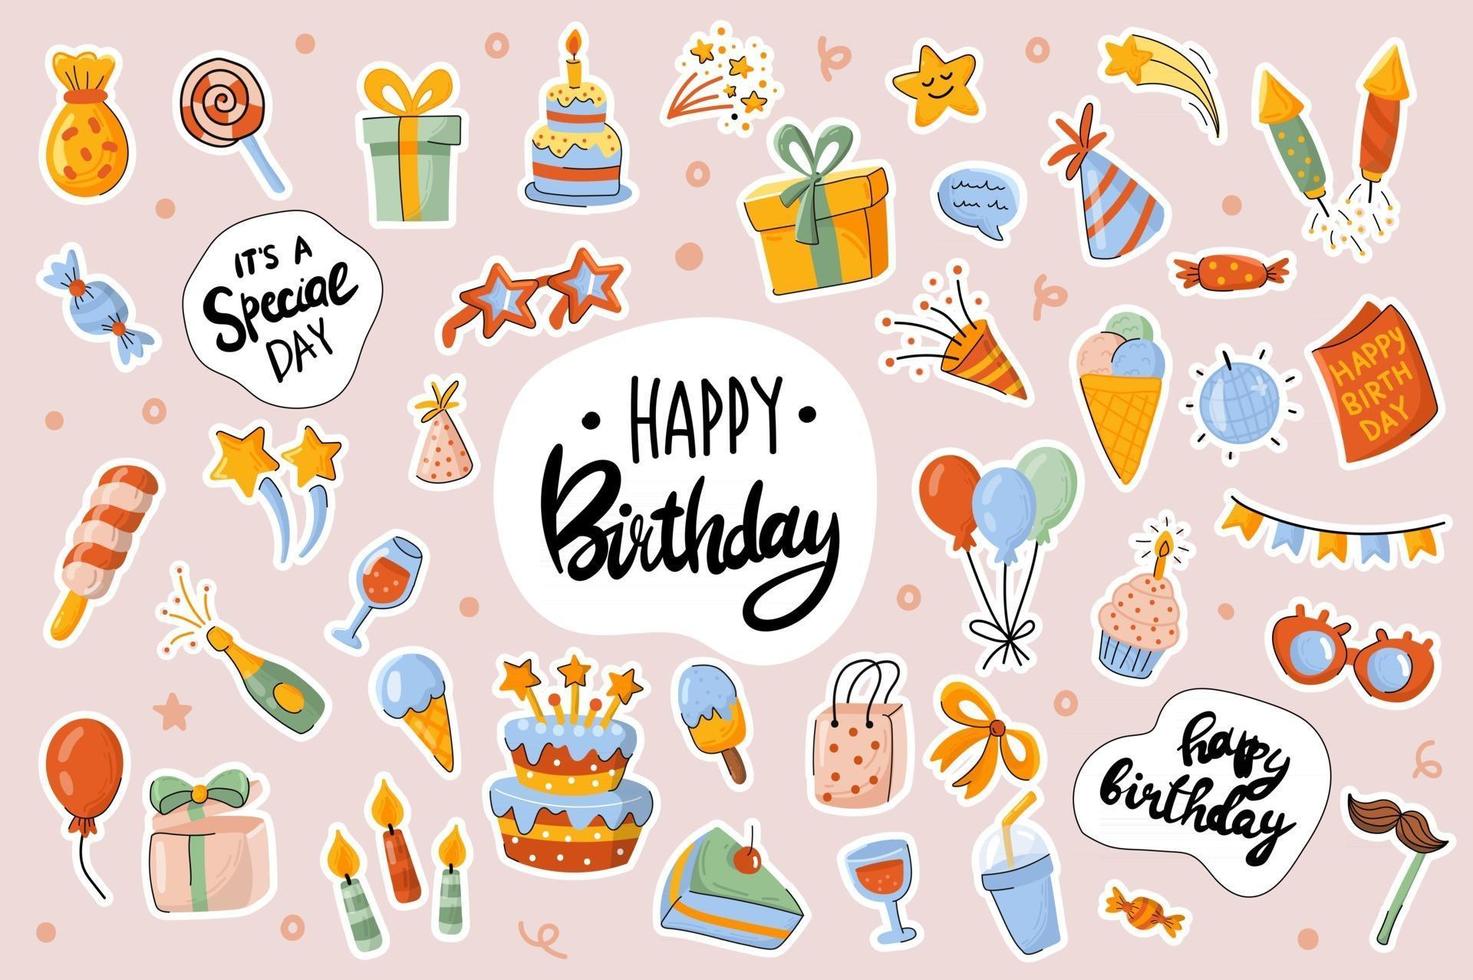 Happy Birthday cute stickers template set vector